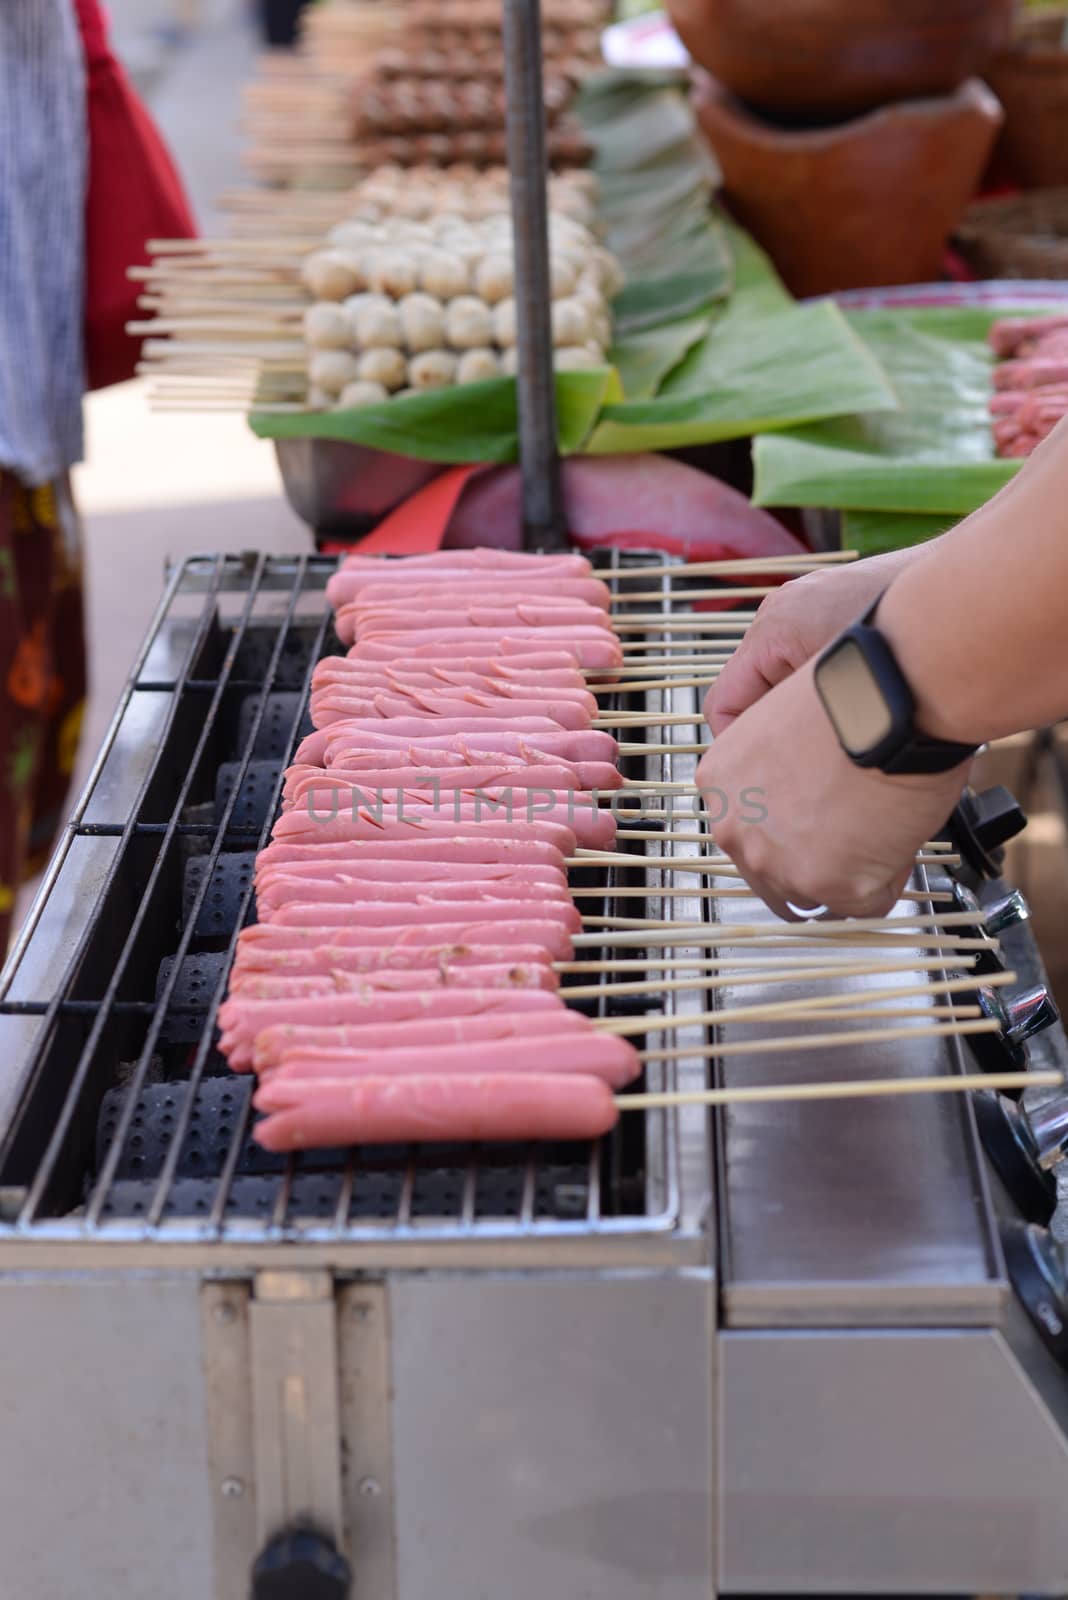 Pink hotdog Skewers Is being roasted on an electric stove